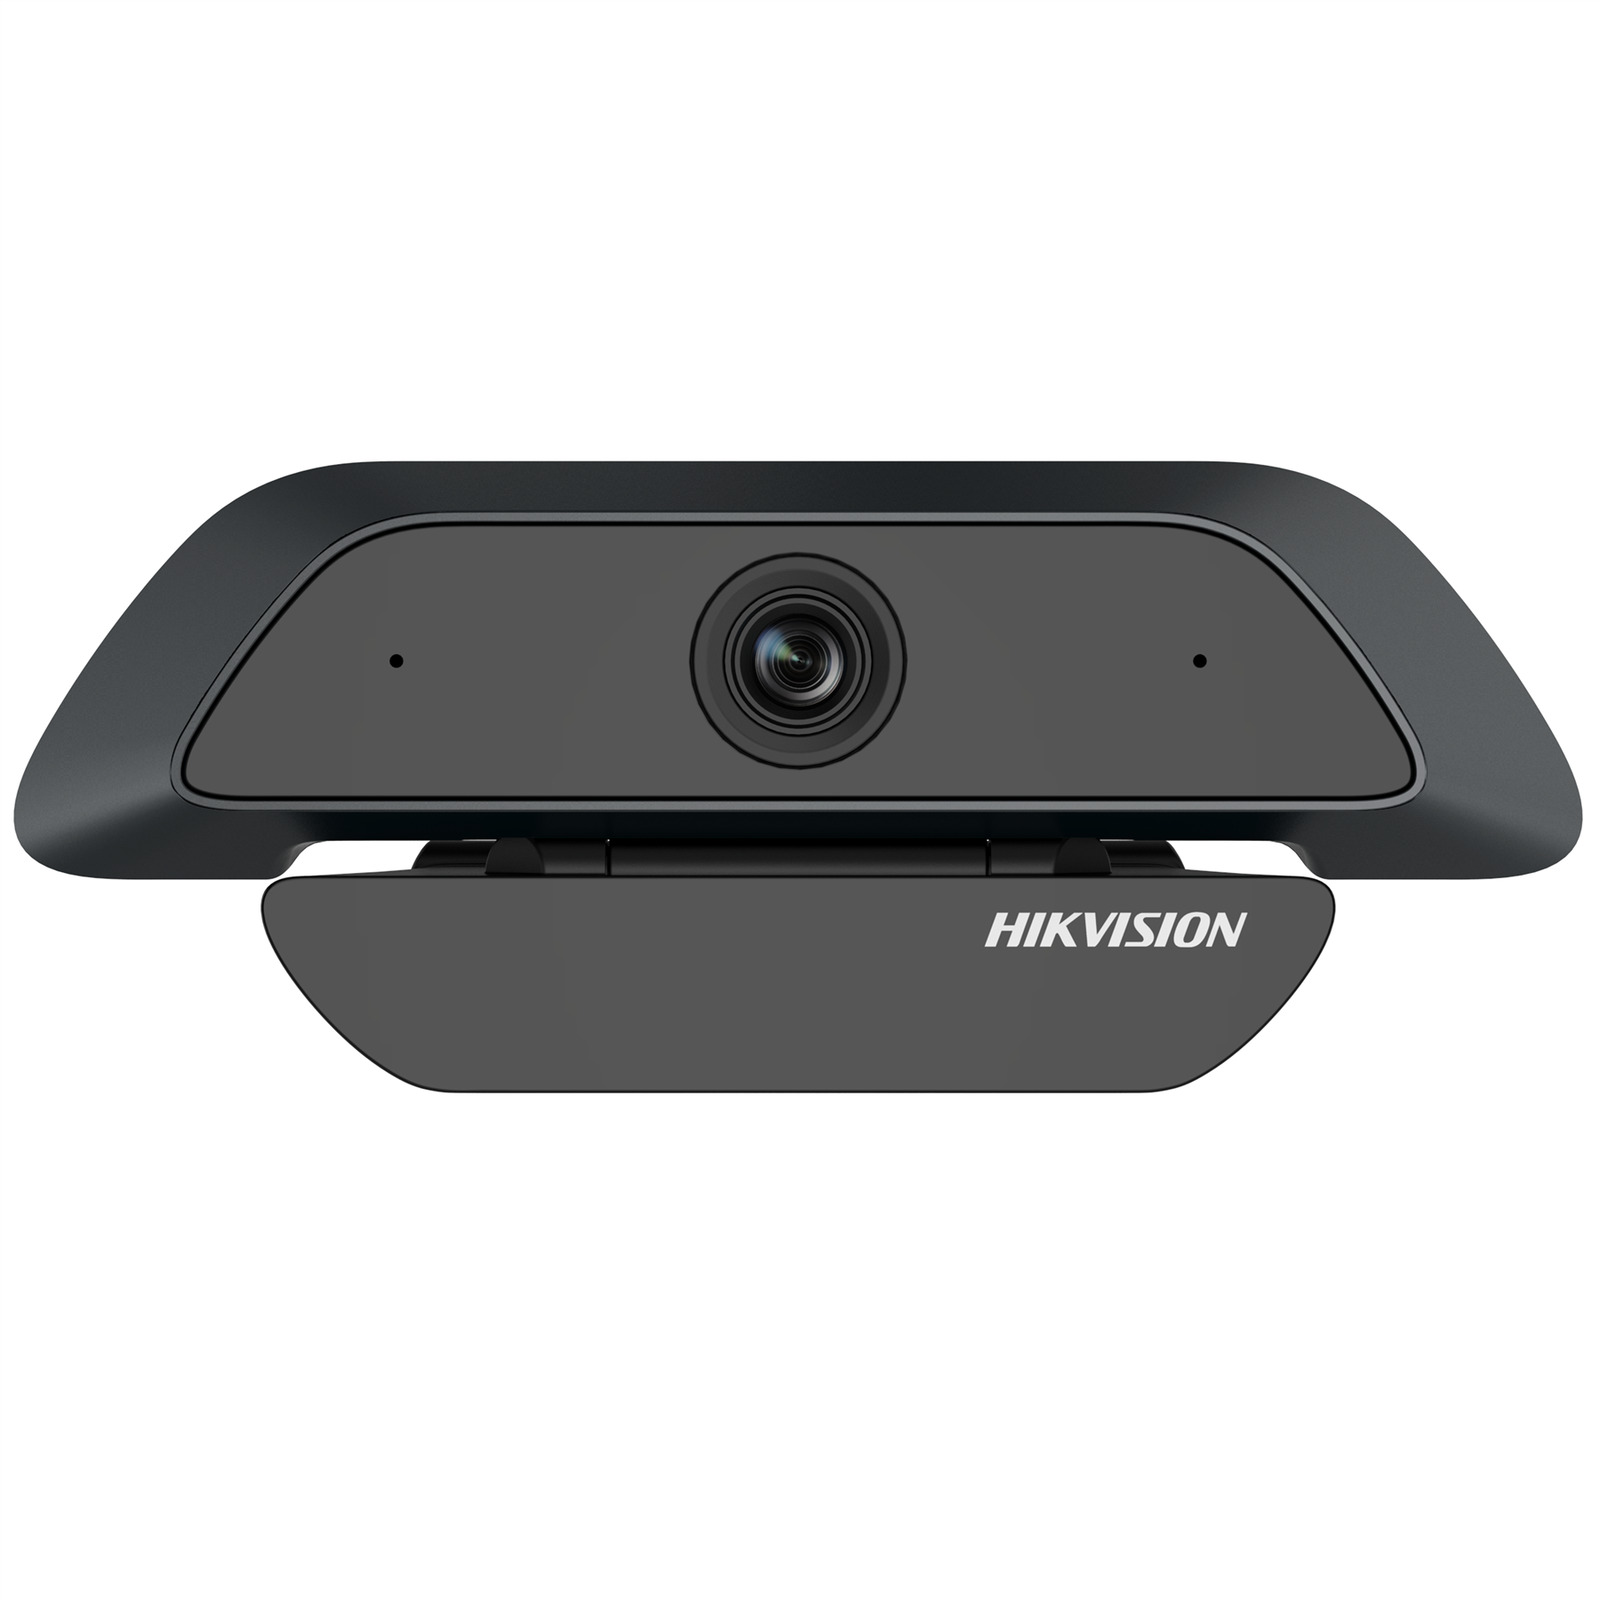 Hikvision DS-U12 2MP 1080P HD USB Web Camera with Built-in Microphone 